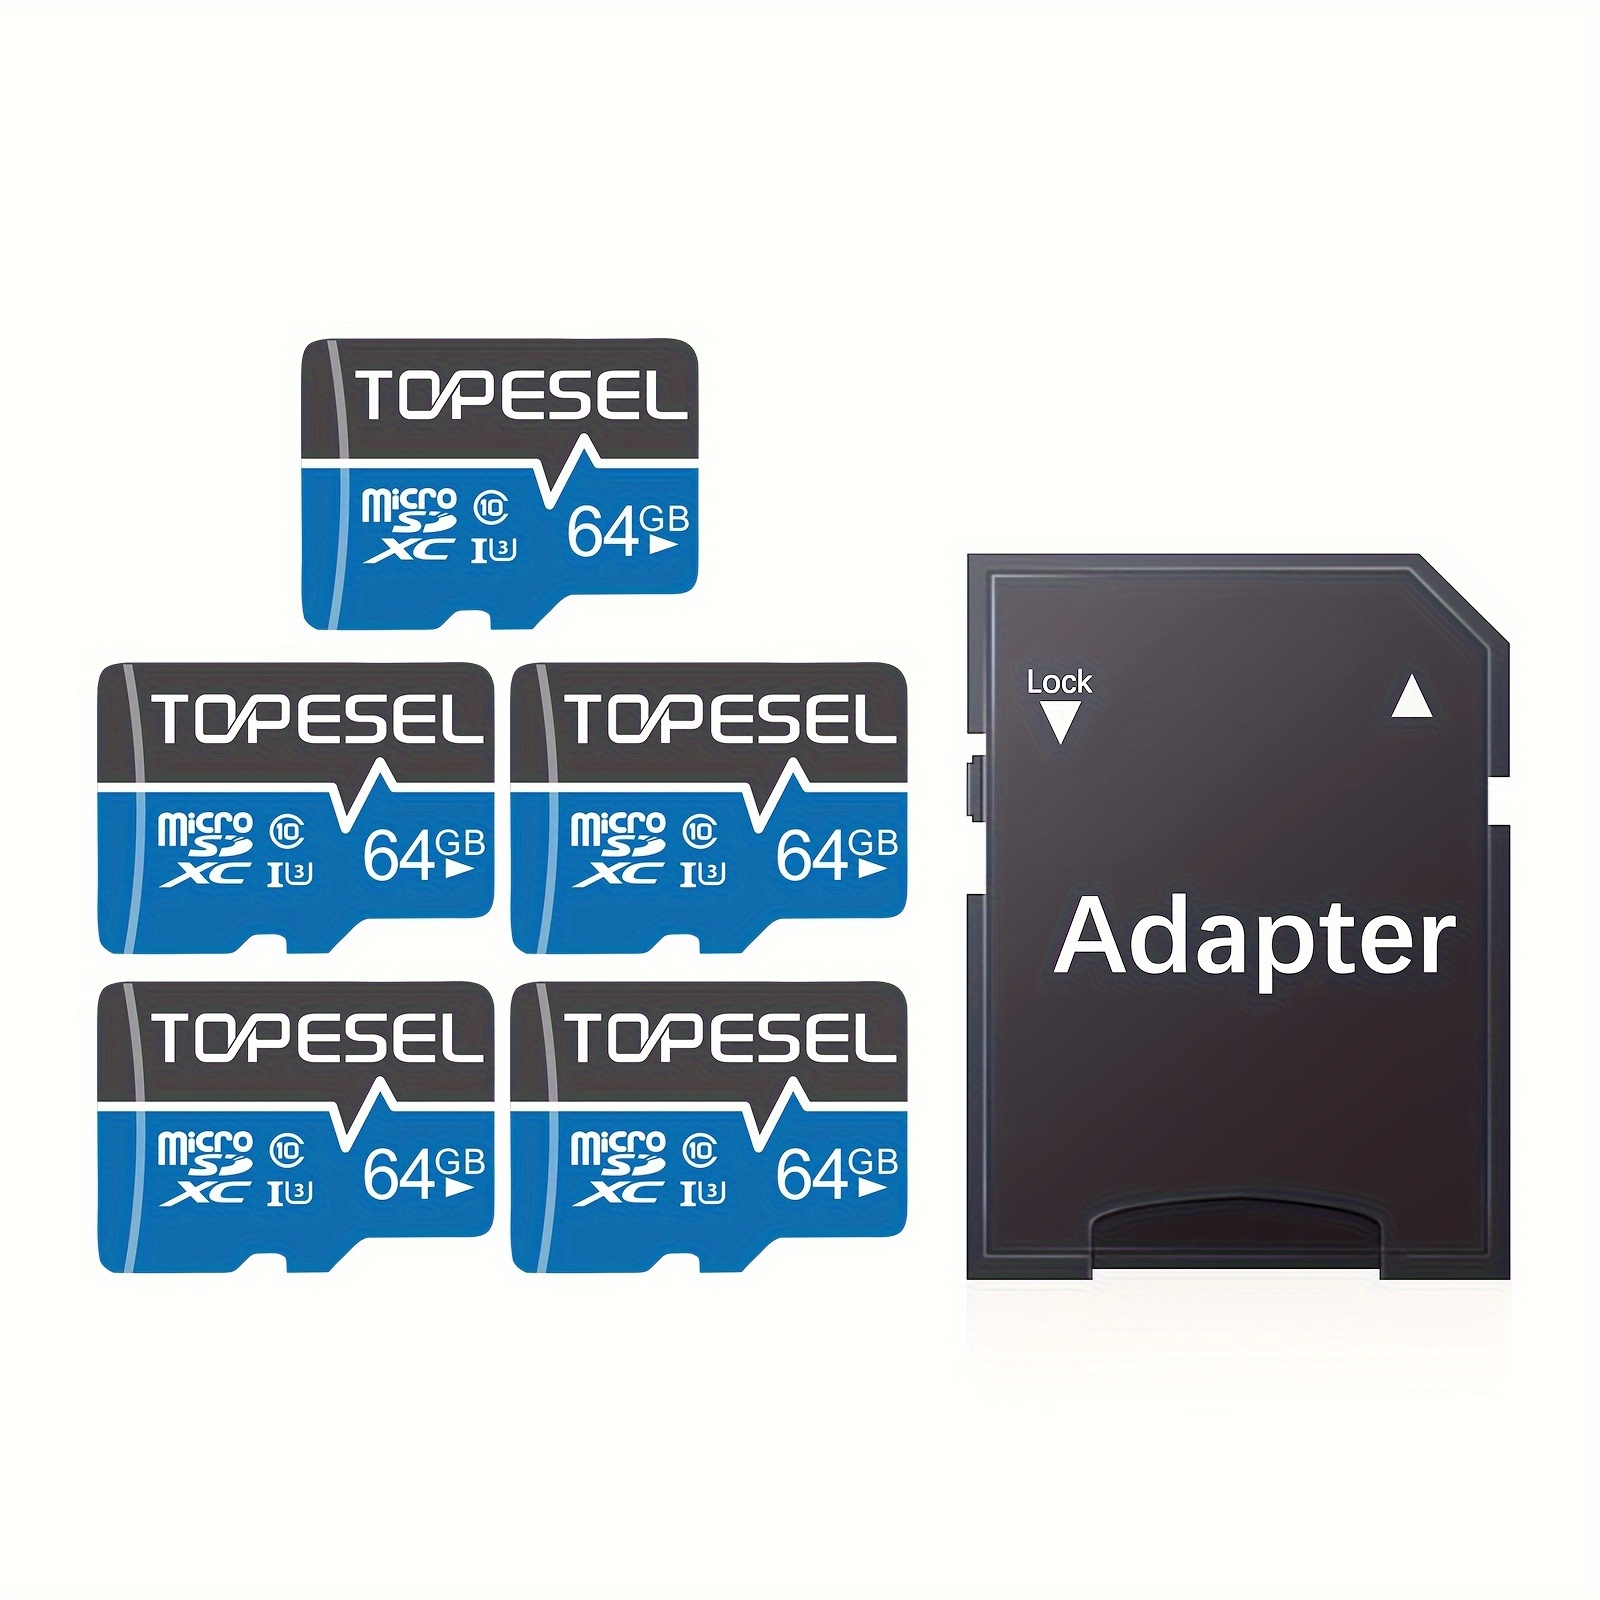 

5pcs-64gb/32gb/16gb Sd Card With Sd Adapter Microsdxc, Sd Card Class 10 Uhs-i Storage Card U1 Tf Card Suitable For Tablet, Smartphone, Dash Cam, Camera Display